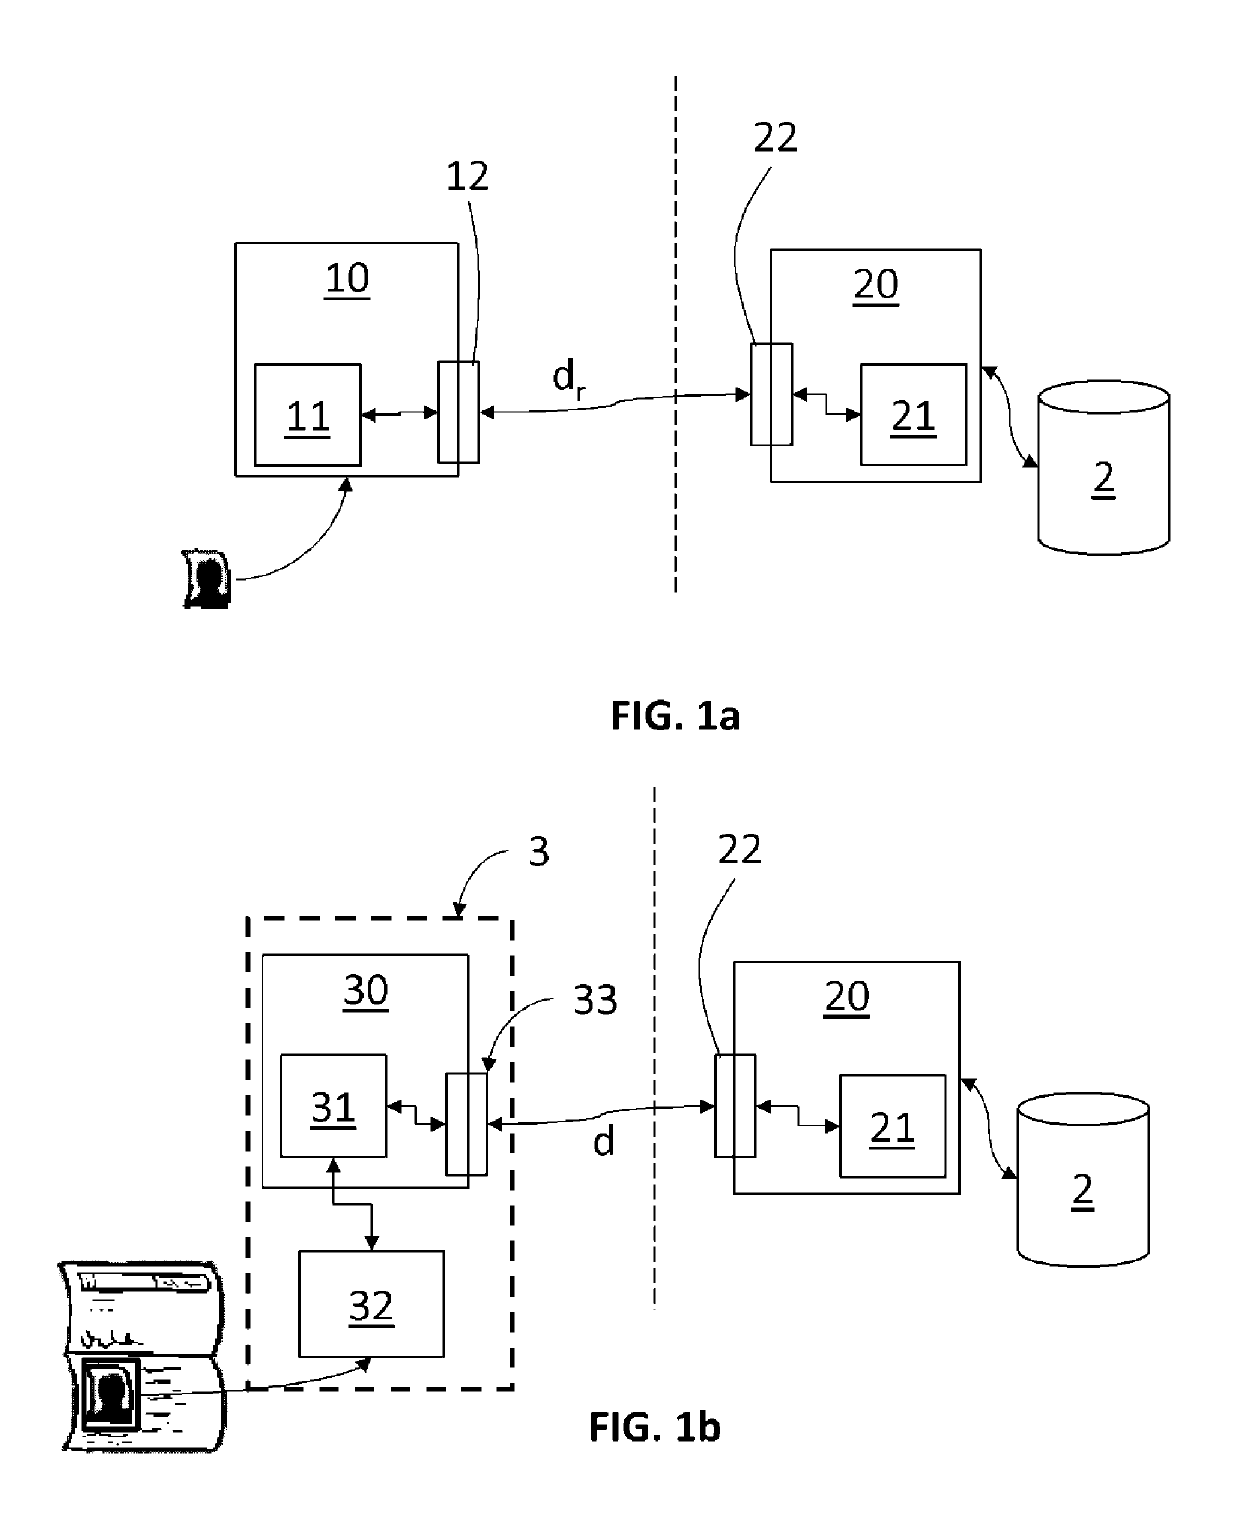 Method for securing and verifying a document